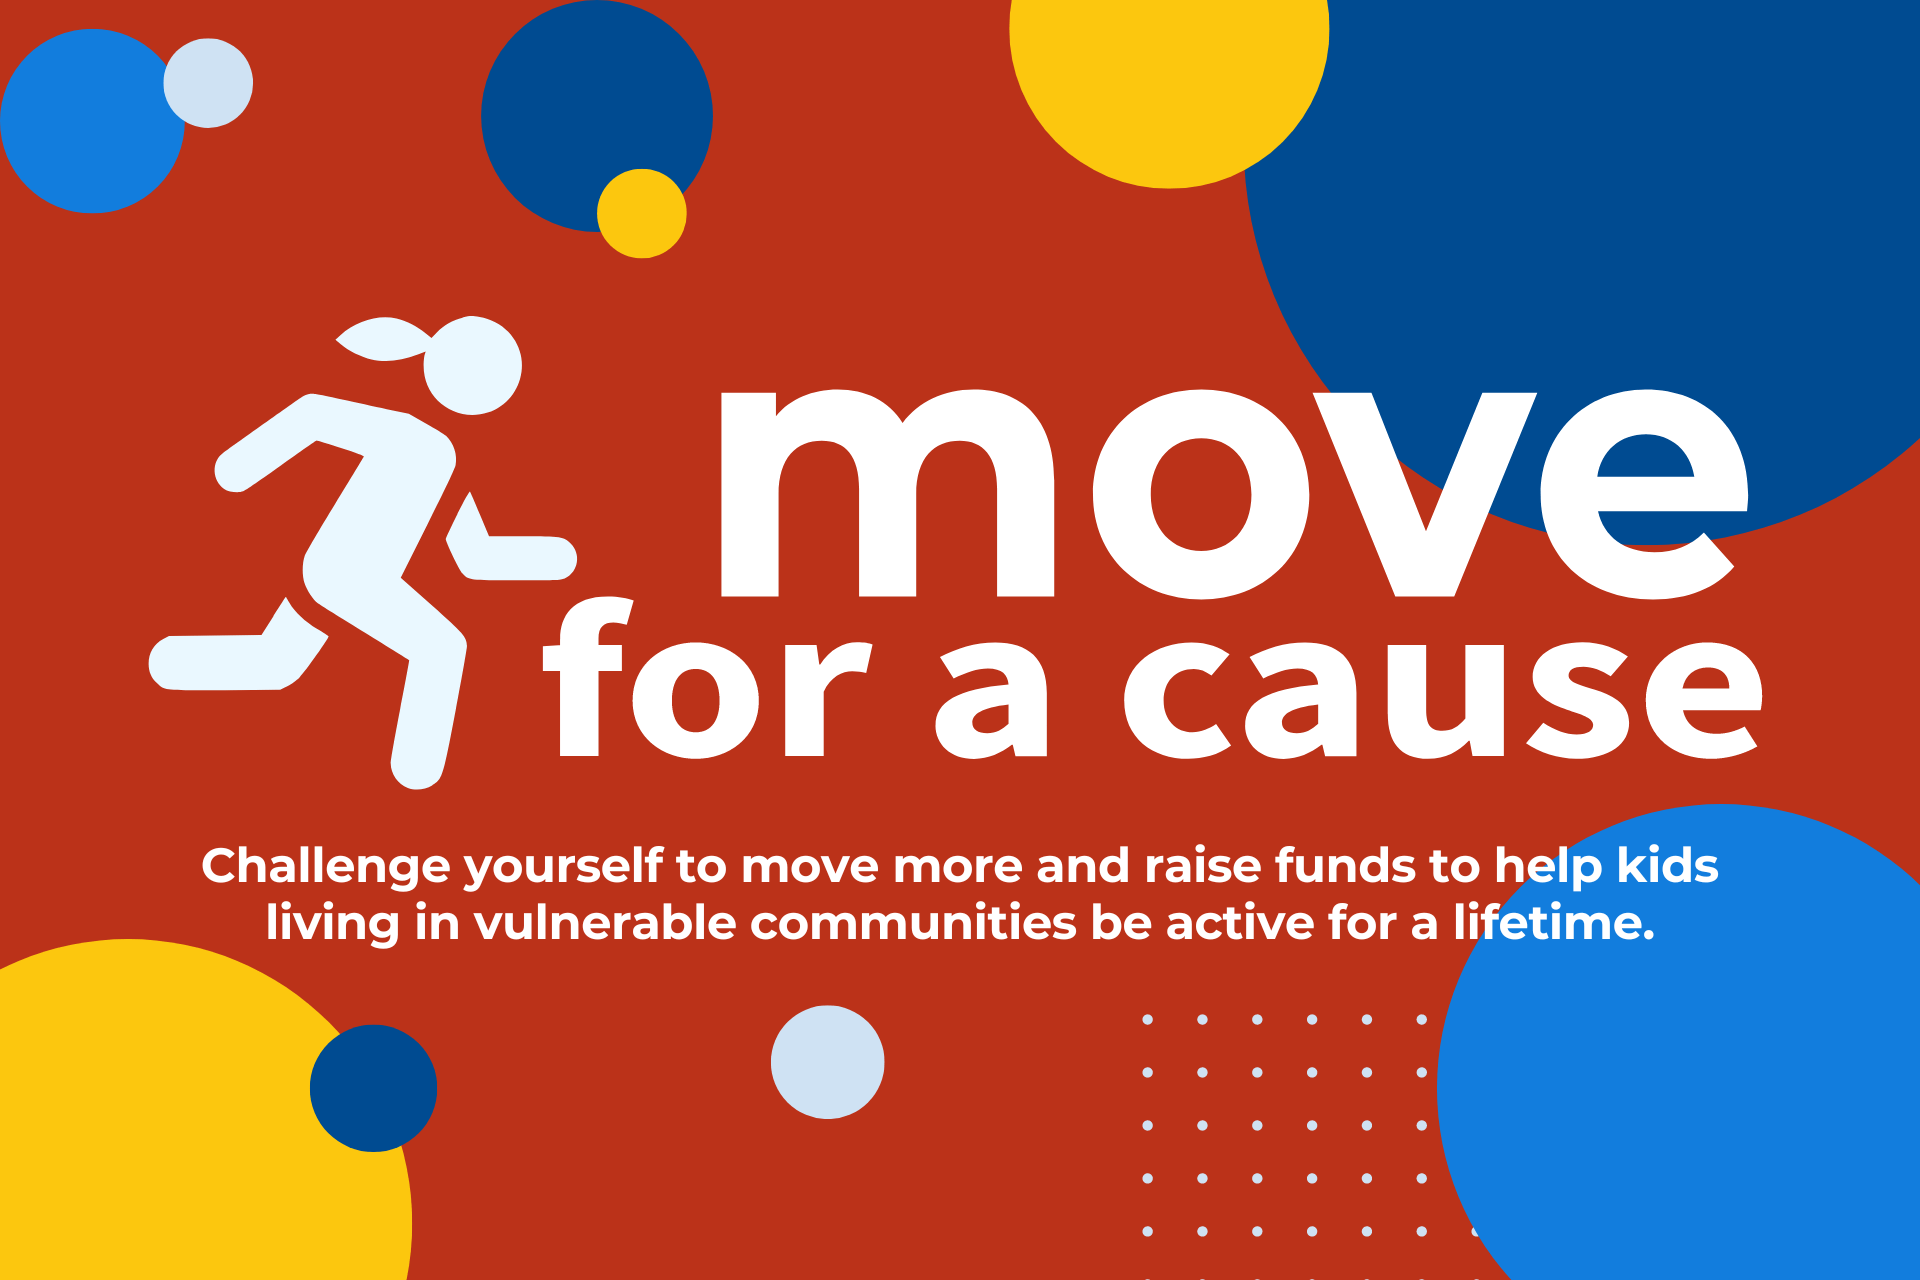 Let’s Move for a Cause and Help Kids Be More Active